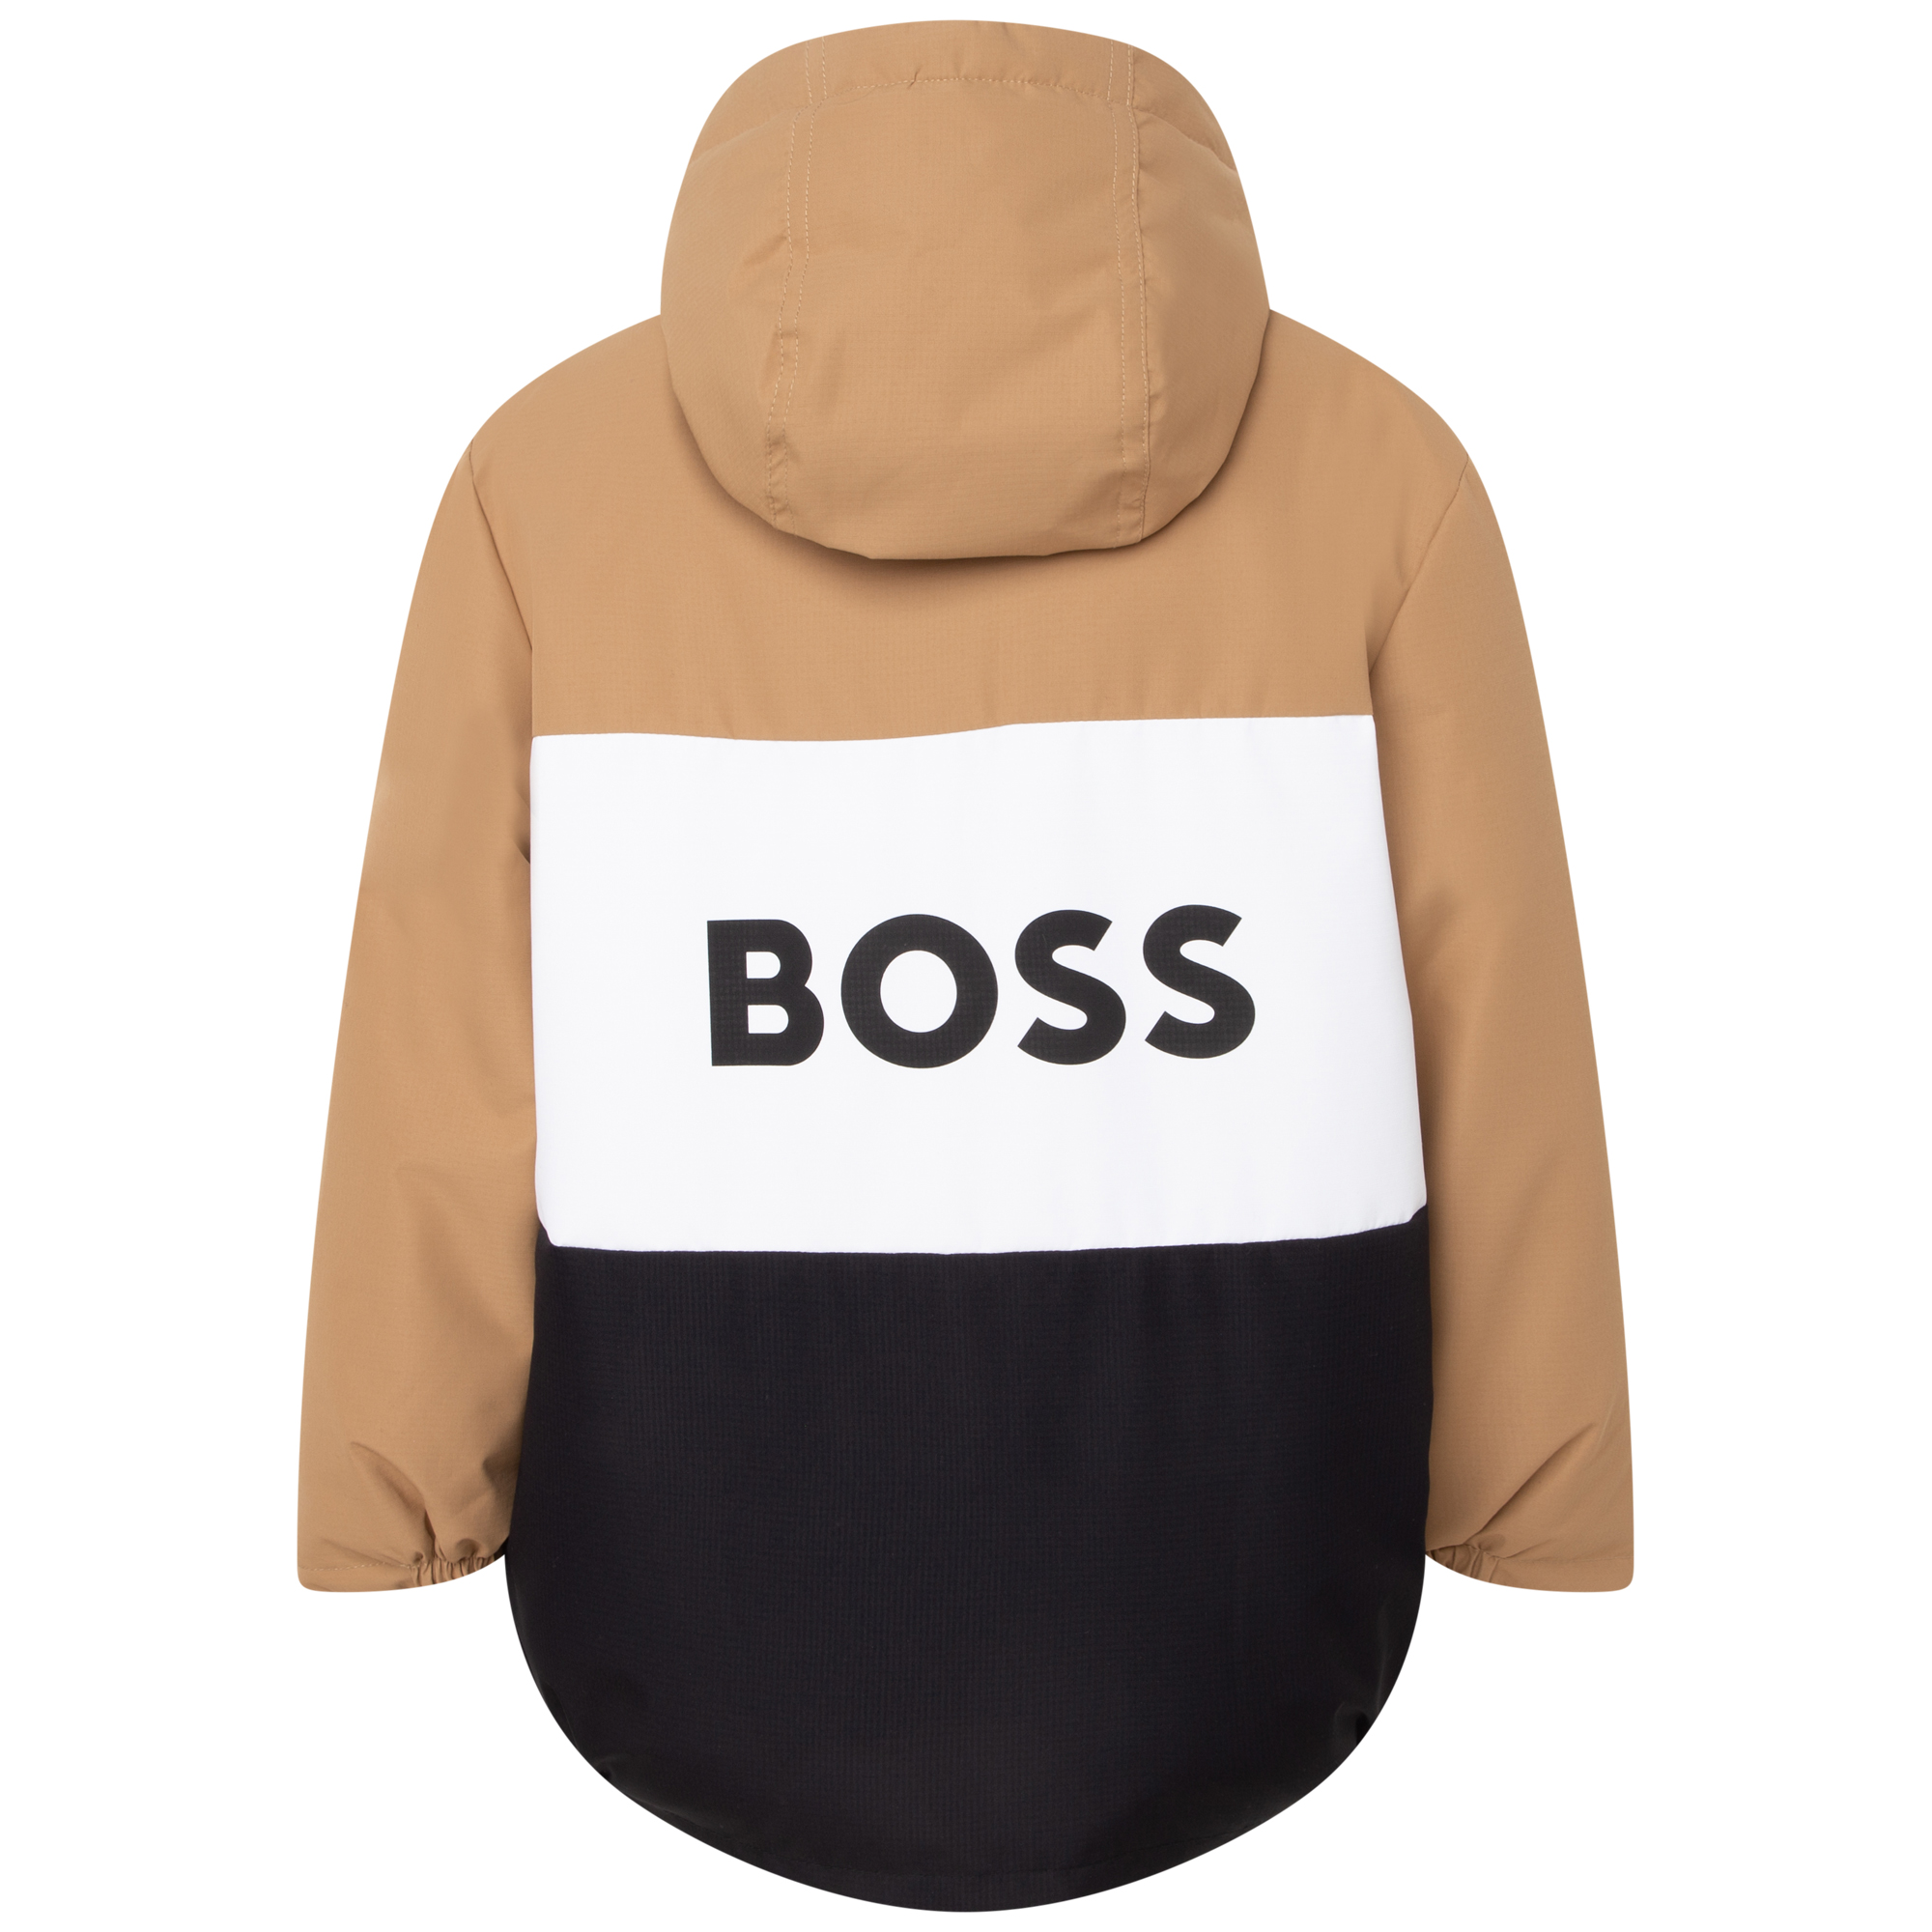 Hooded water-resistant coat BOSS for BOY